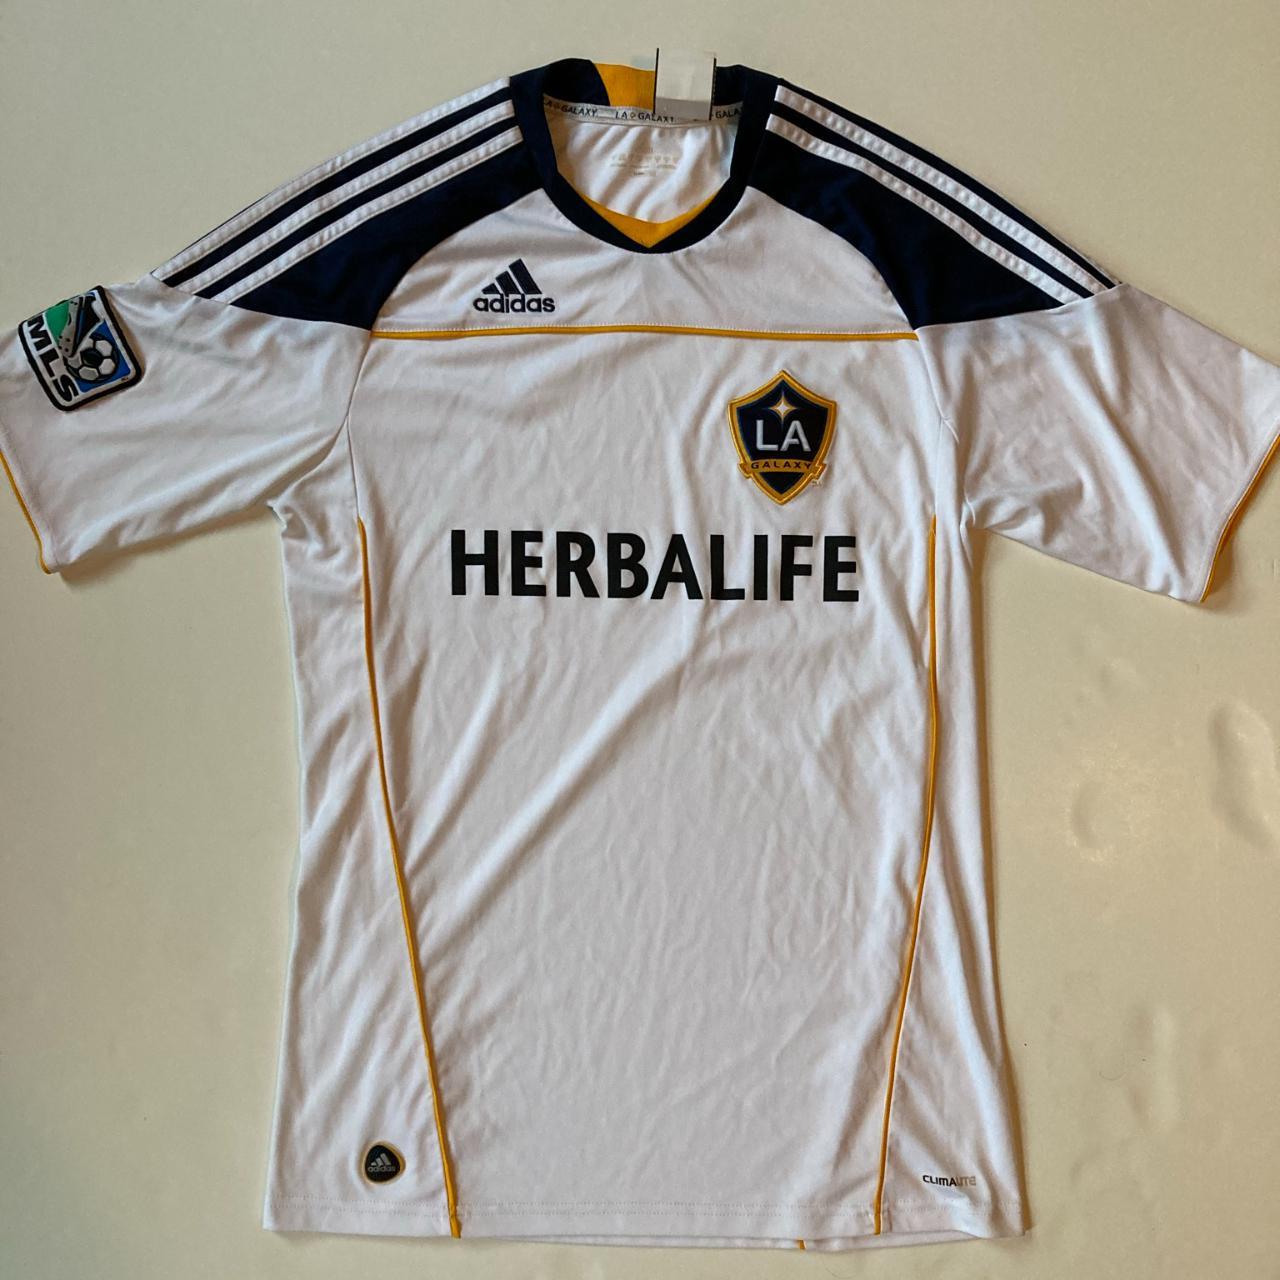 Adidas LA Galaxy Home Jersey In White & Navy - Buy now - Soccer